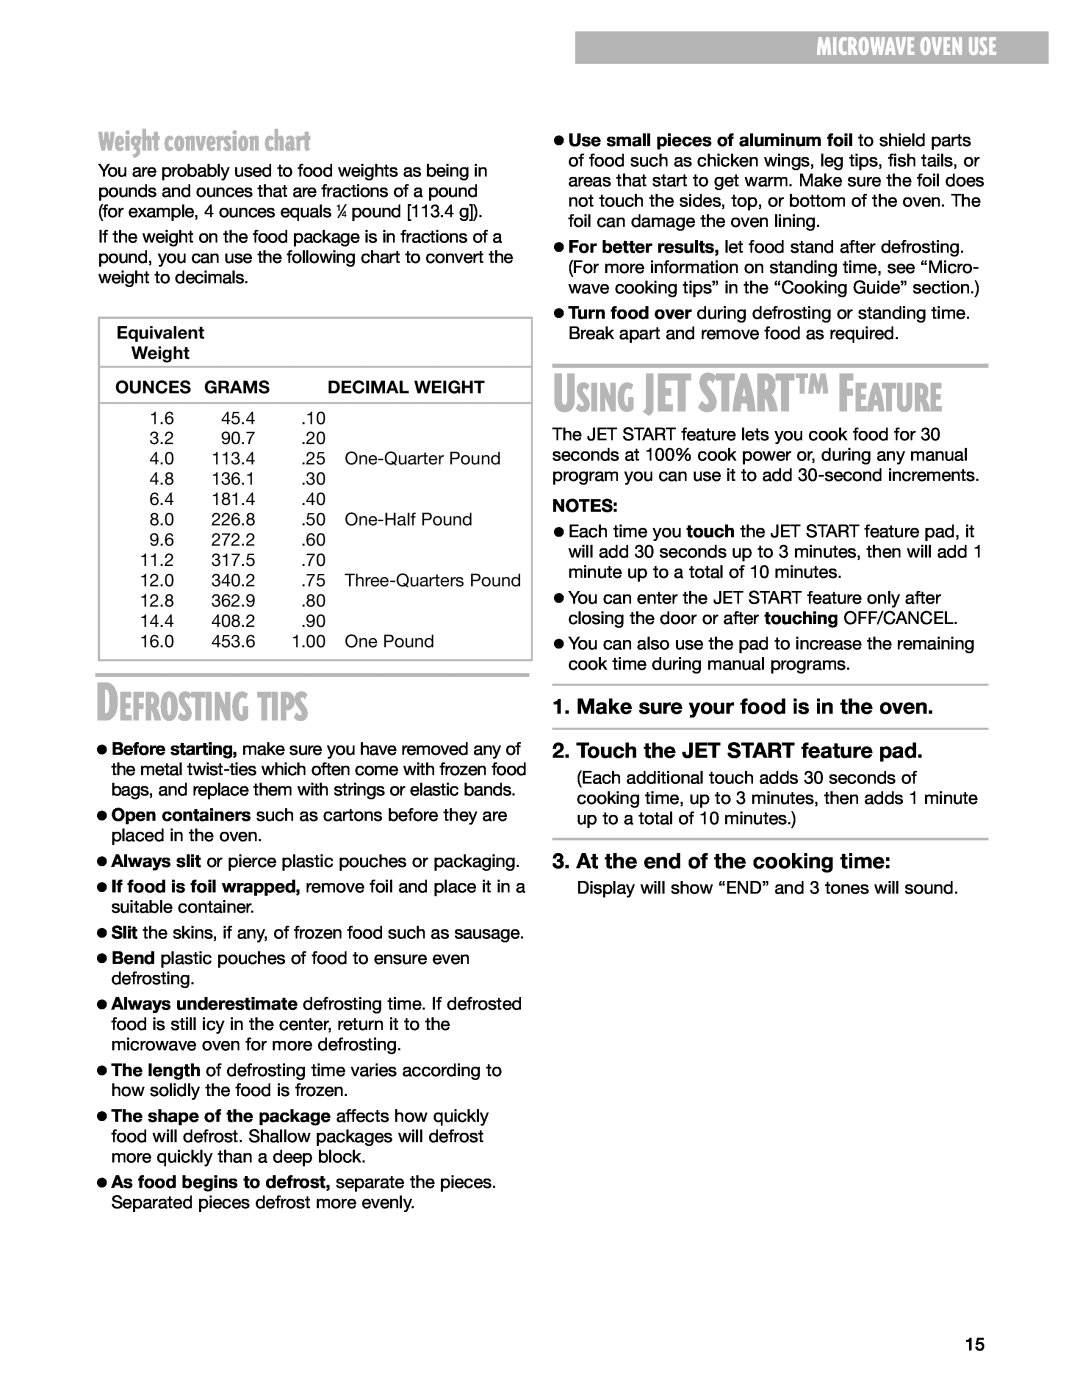 Whirlpool GT4185SK Defrosting Tips, Weight conversion chart, Make sure your food is in the oven, Using Jet Startª Feature 